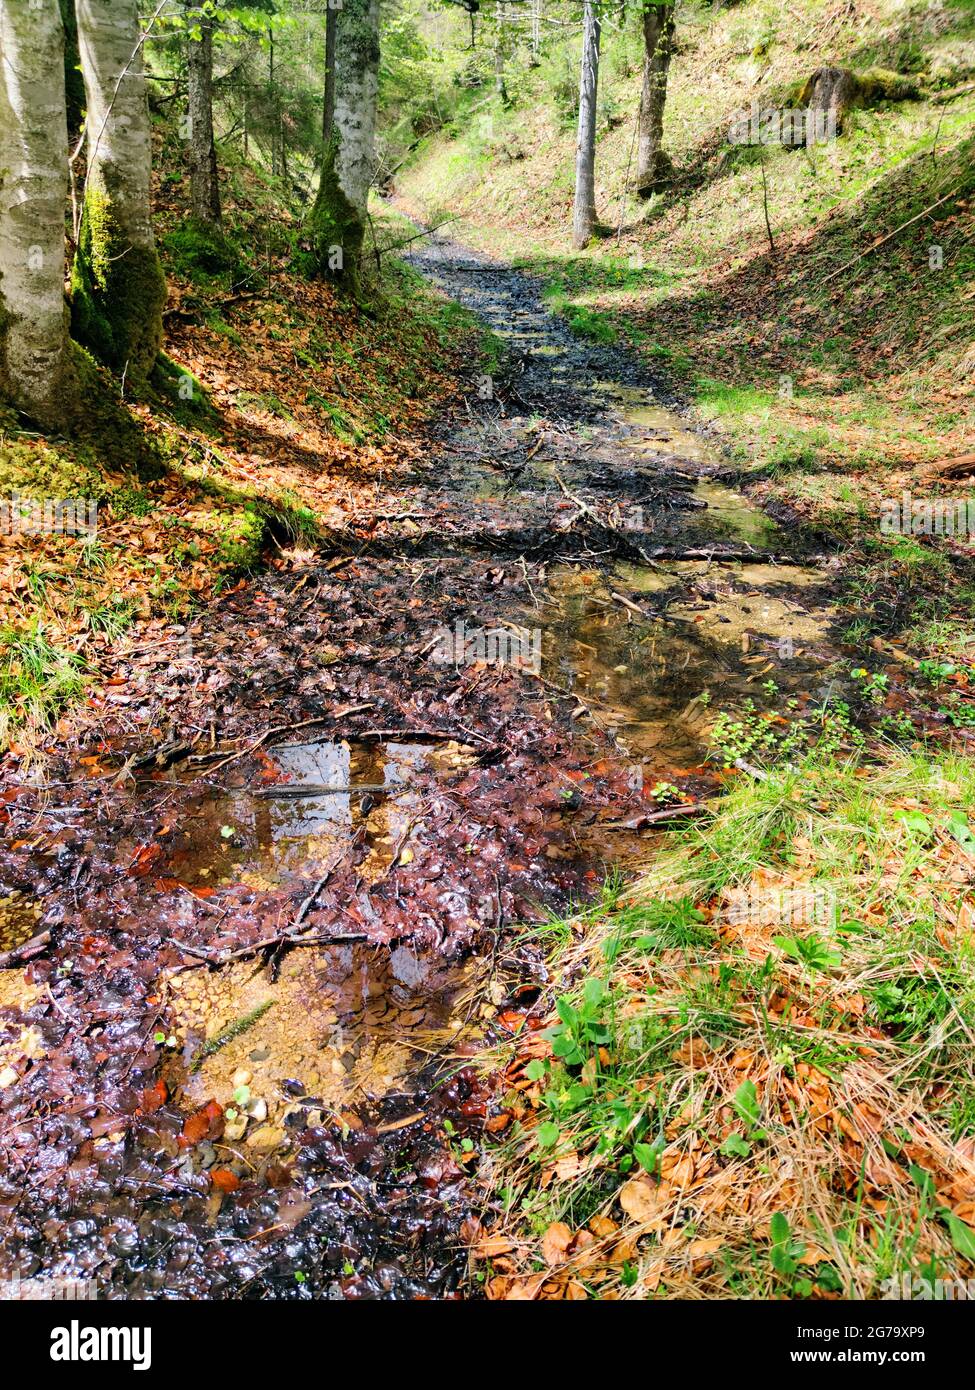 Forest path in the beech forest flooded after heavy rain Stock Photo